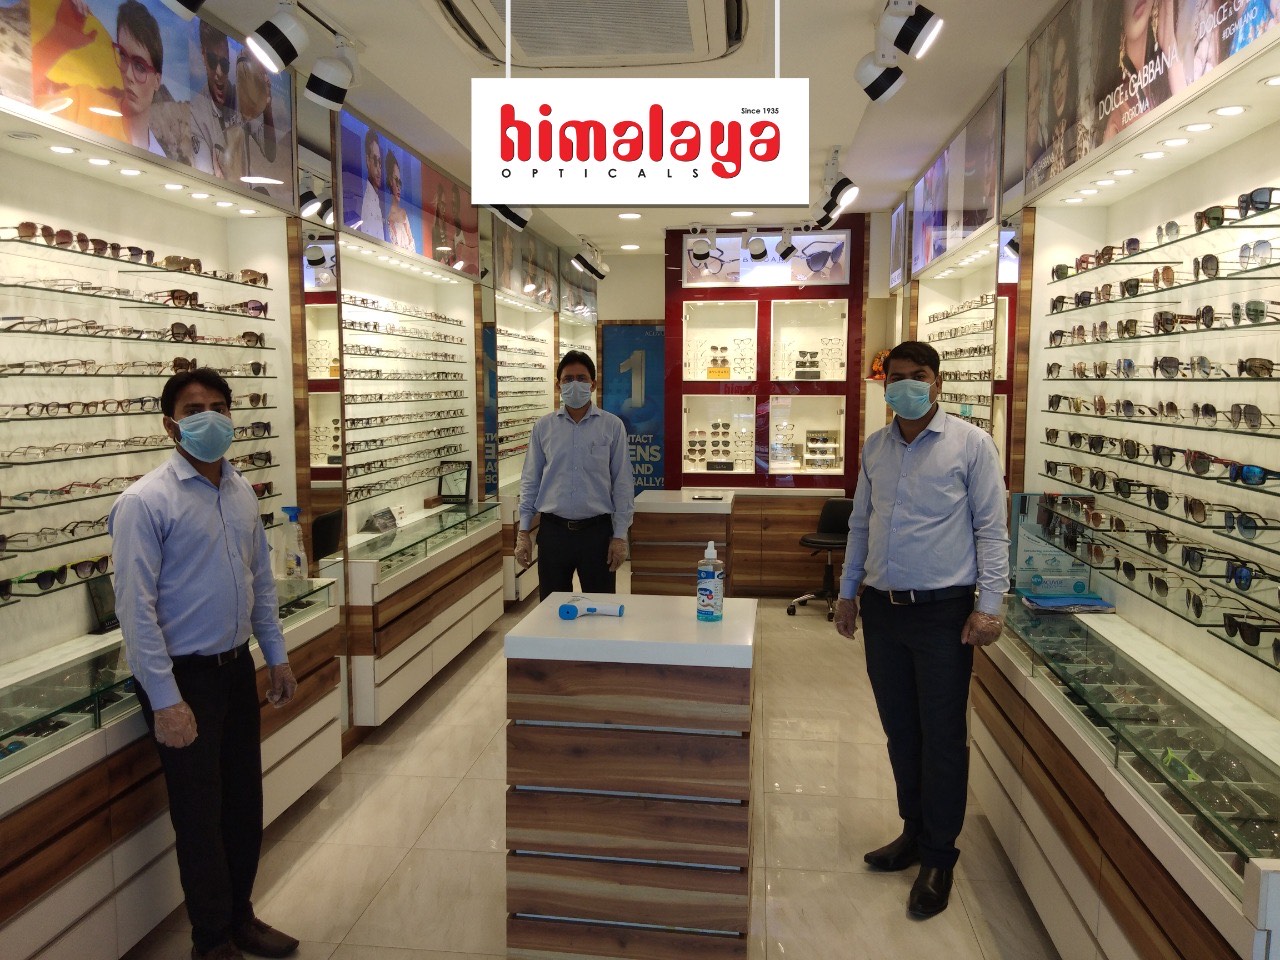 Luxottica India's partner retail store Himalaya Opticals reopens after lockdown